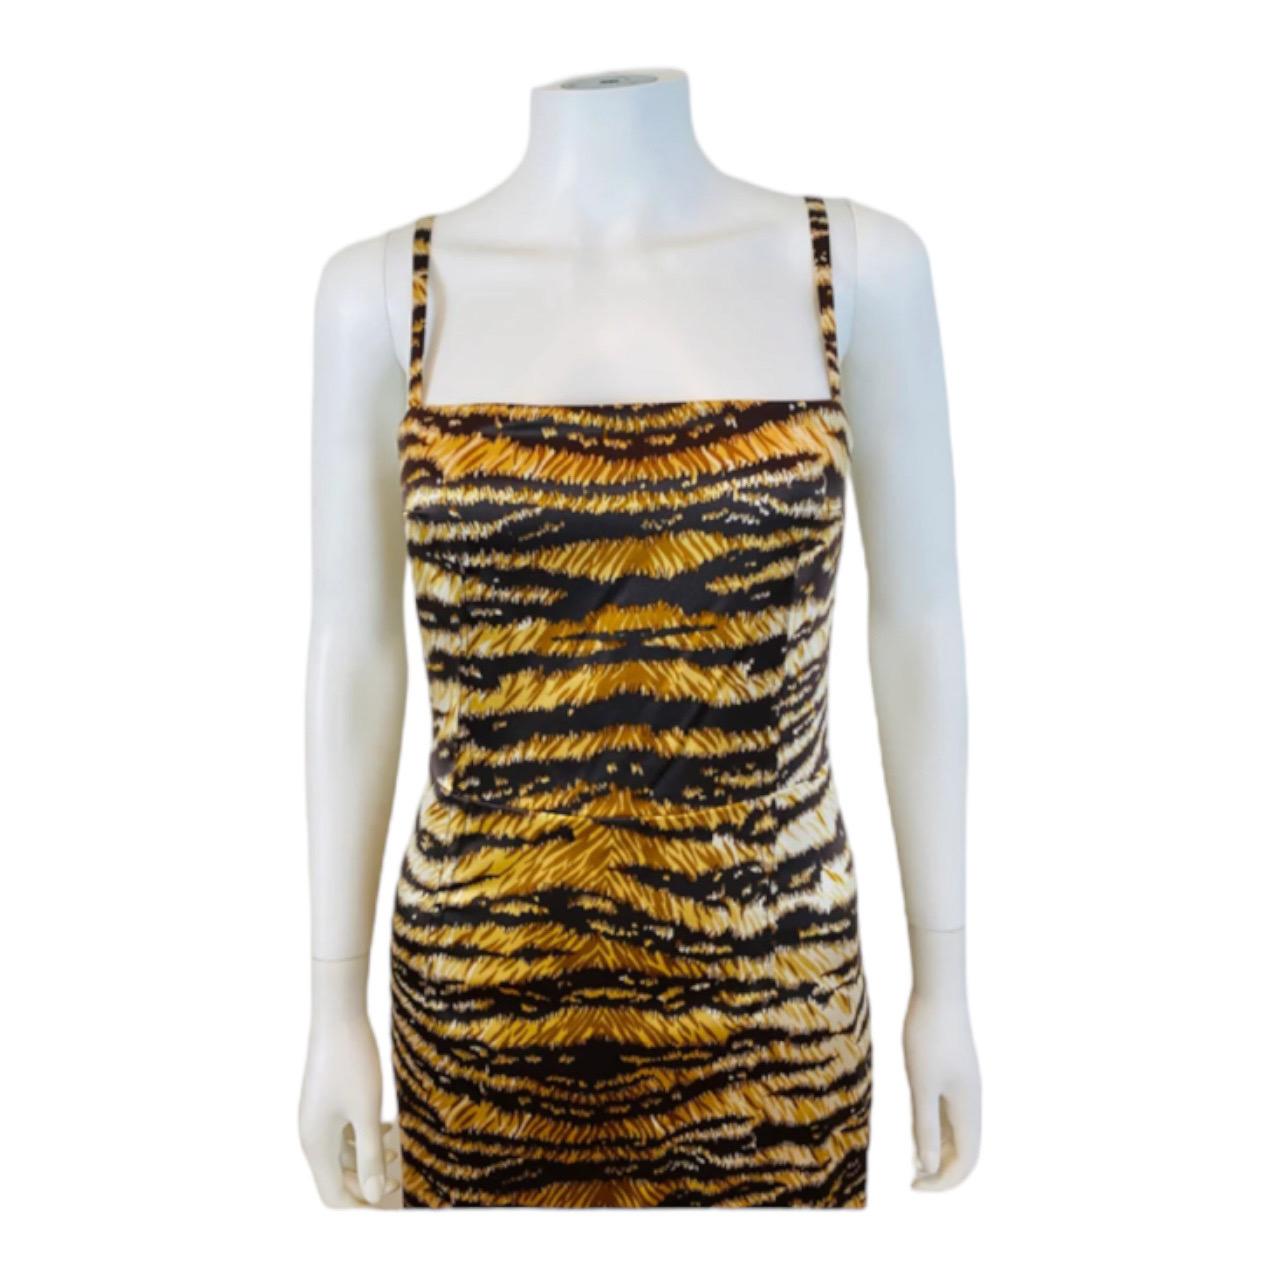 Vintage Dolce + Gabbana Dress
Stretch silk bold tiger stripe print
Thin shoulder straps
Fitted bodice with darts at the bust
Wiggle fit
Tapered knee length skirt with slit at the bottom hem
Hidden zipper up the back 
Fully lined
Original tags